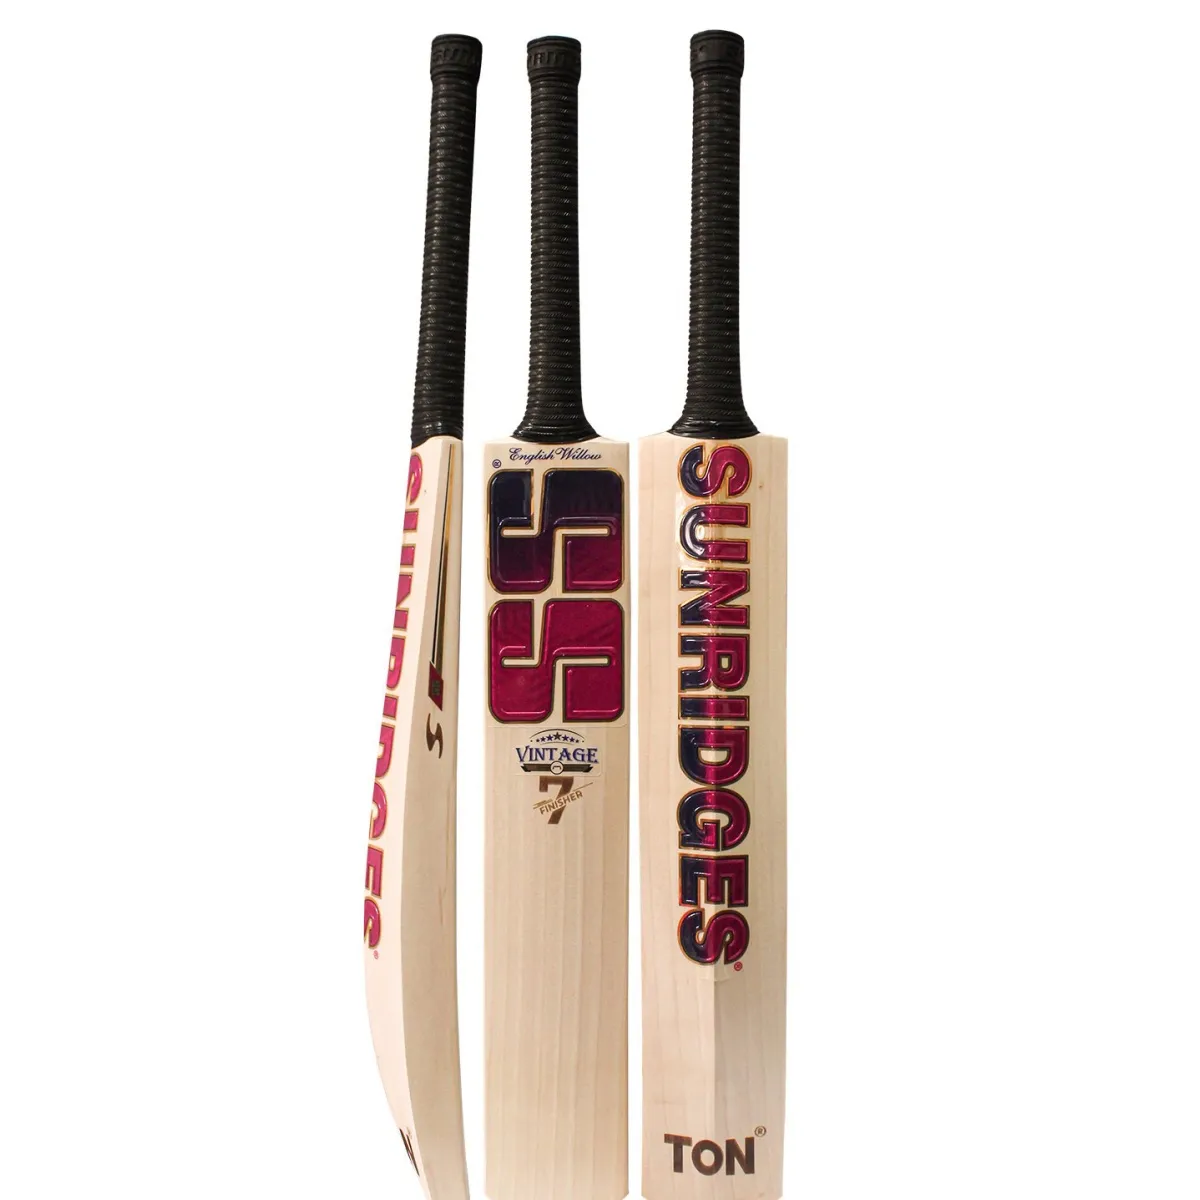 Buy SS Vintage Finisher 7 English Willow Cricket Bat - Sportsuncle